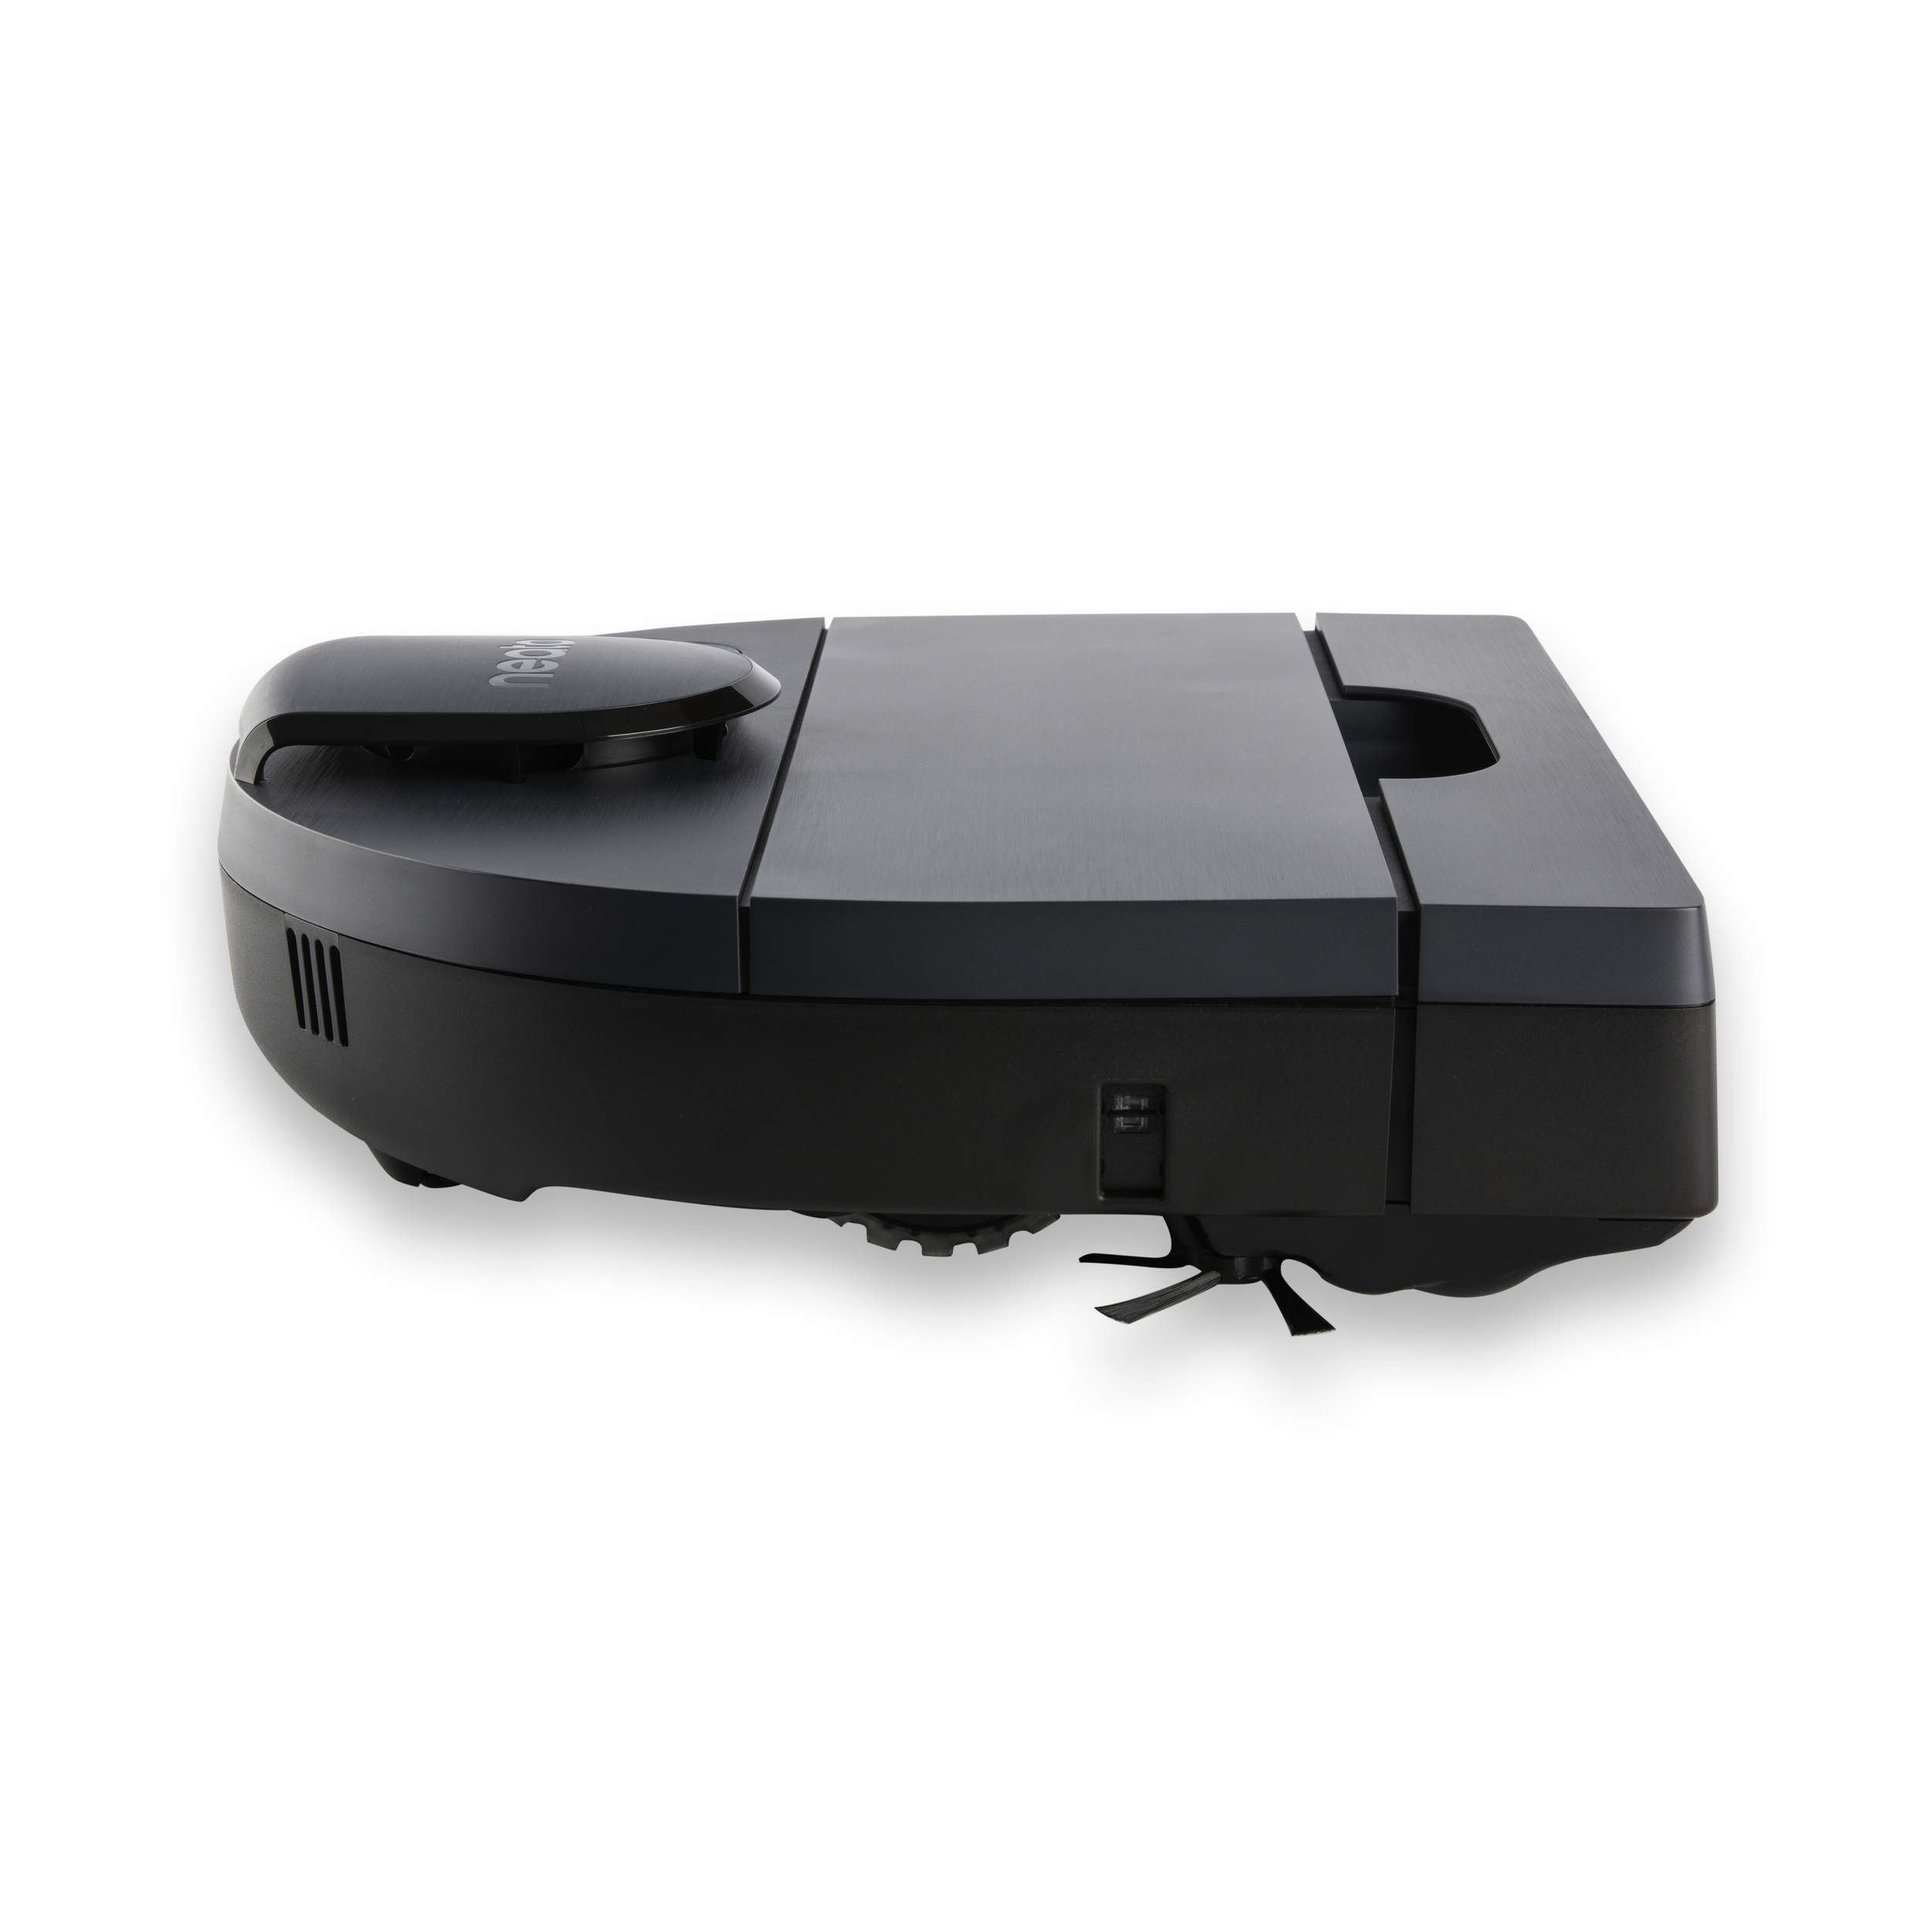 Neato D8 Intelligent Robot Vacuum Wi-Fi Connected with LIDAR Navigation in Indigo - image 4 of 23